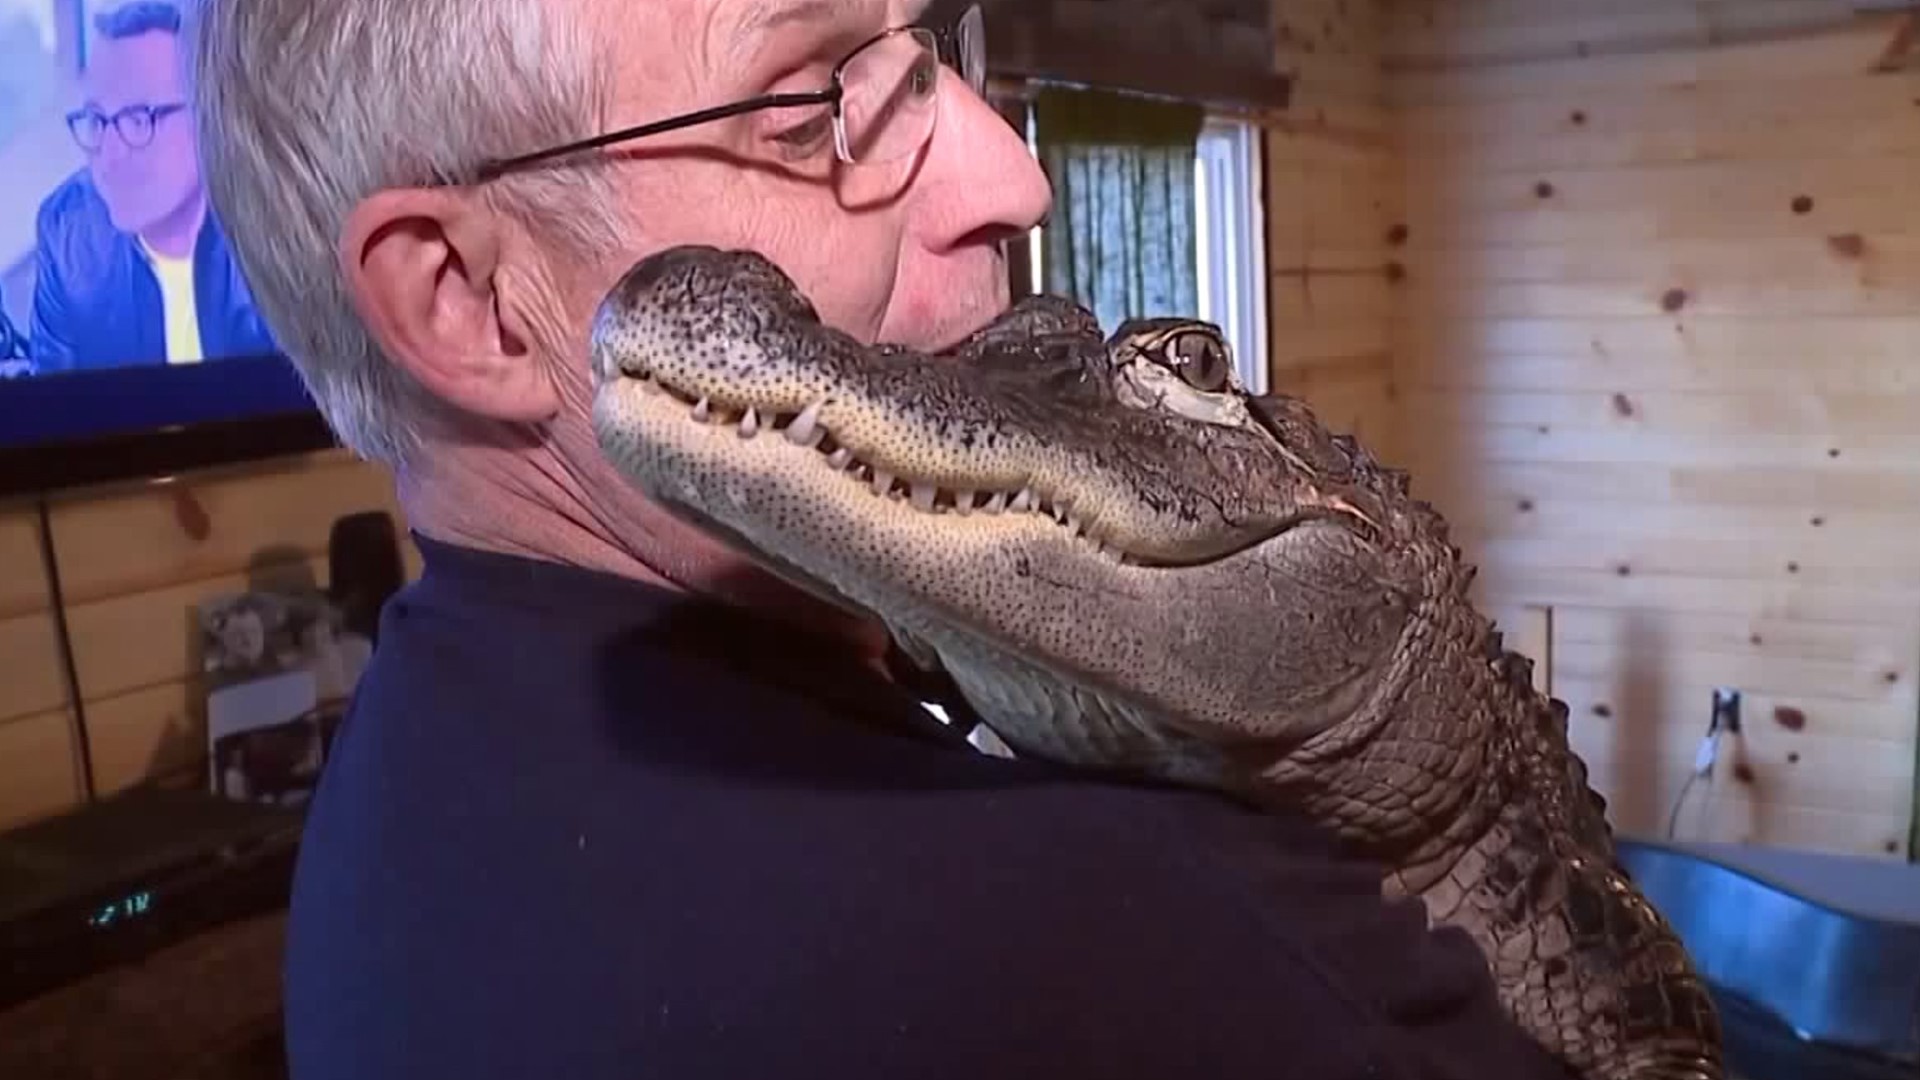 While some emotional support animal claims aren't backed up, WallyGator is actually a working emotional support alligator registered to a man in Pennsylvania.